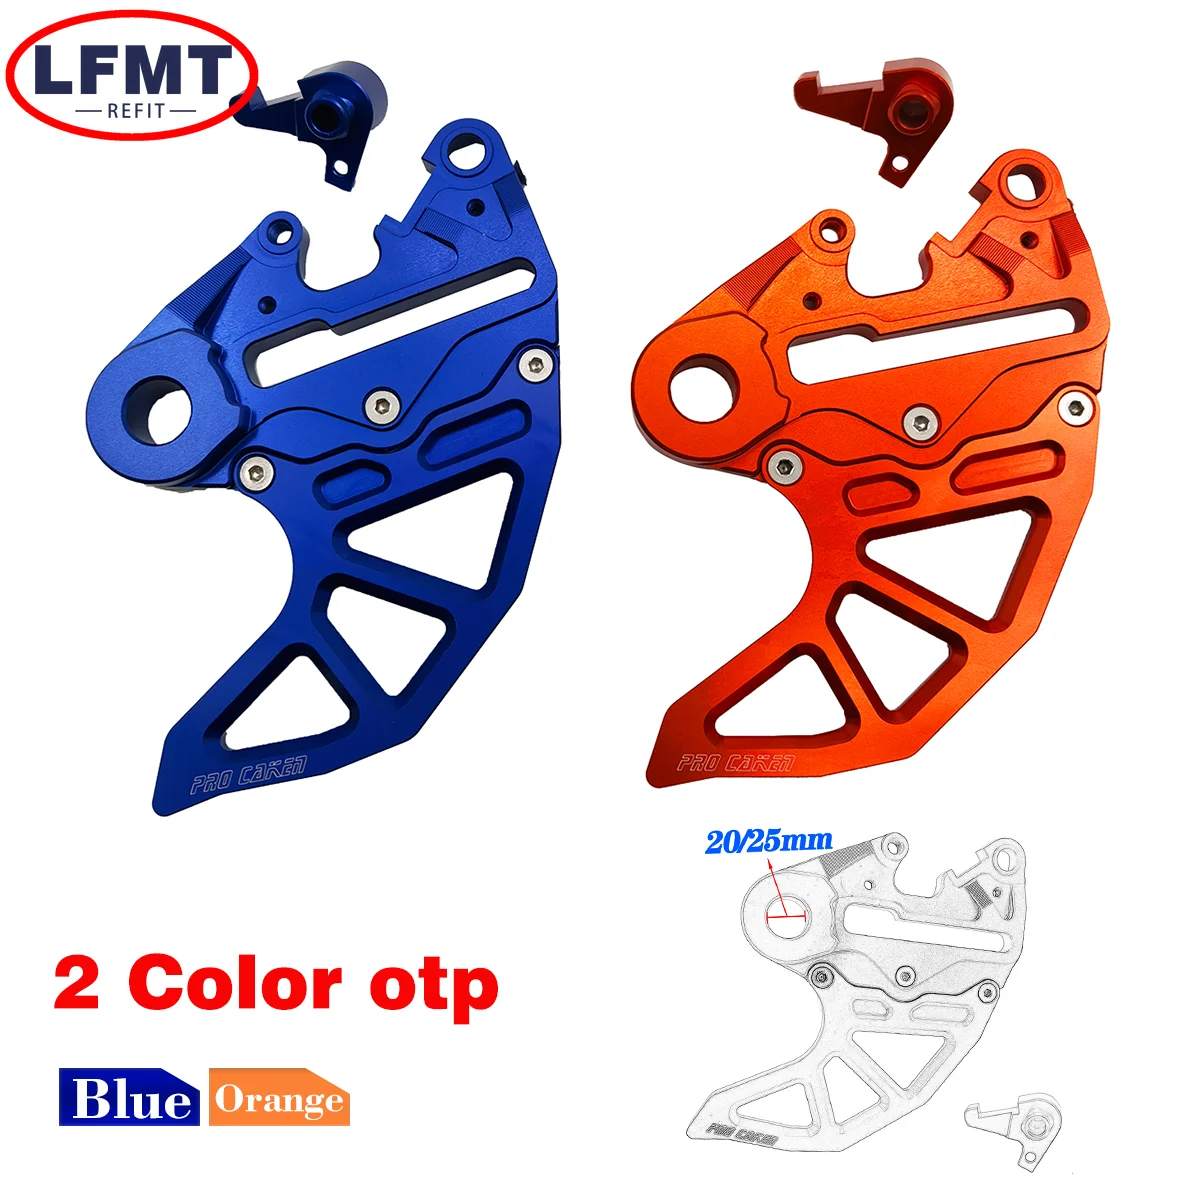 

For KTM SX SXF SMR XC XCF XCW EXC EXCF 6 Days 125 250 300 350 400 450 530 2004-2022 2023 CNC Rear Brake Disc Guard Protector